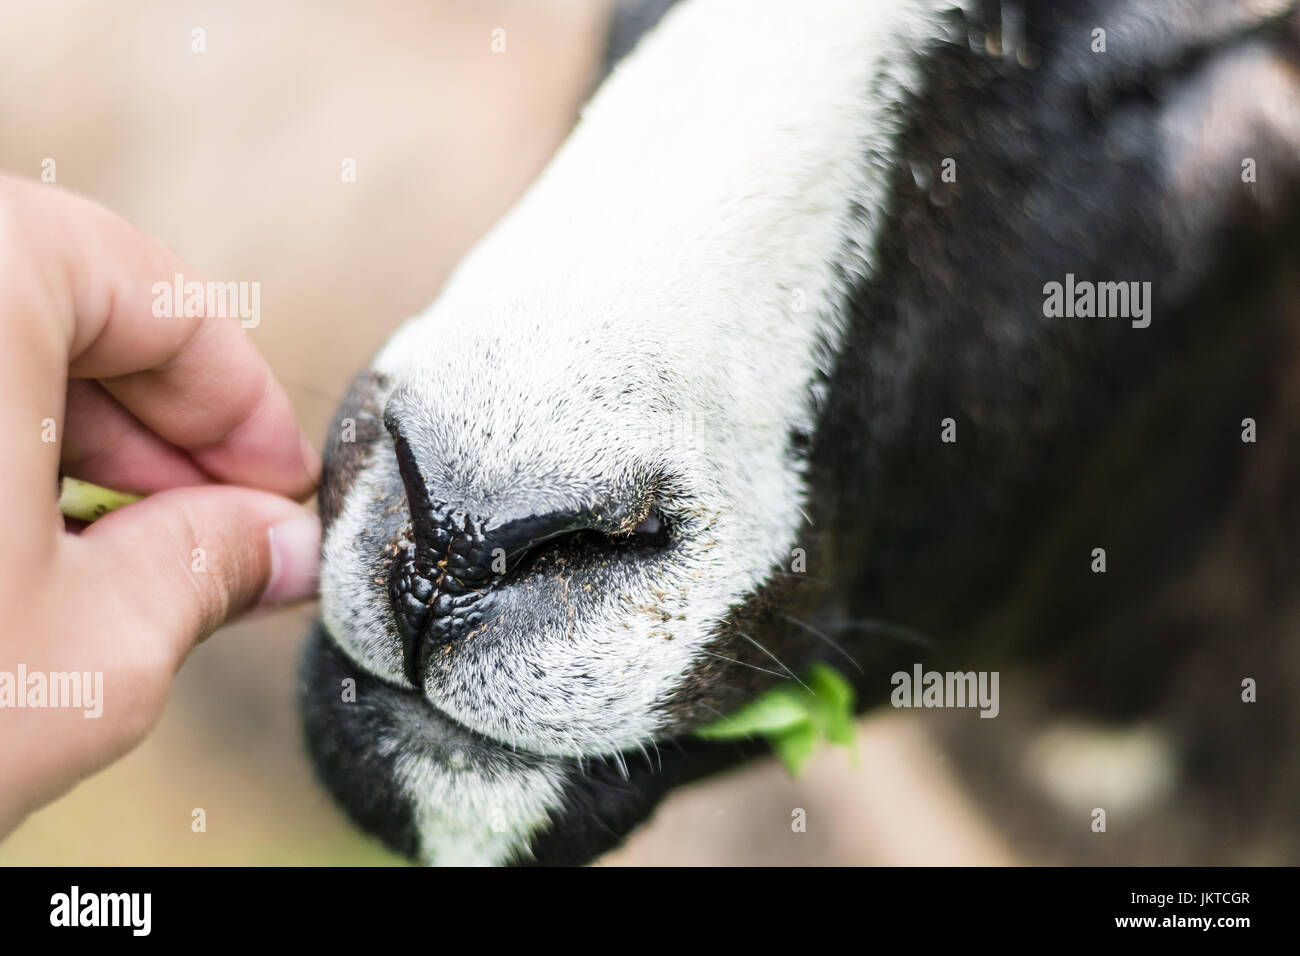 Feeding of young and hungry sheep from hand. Stock Photo